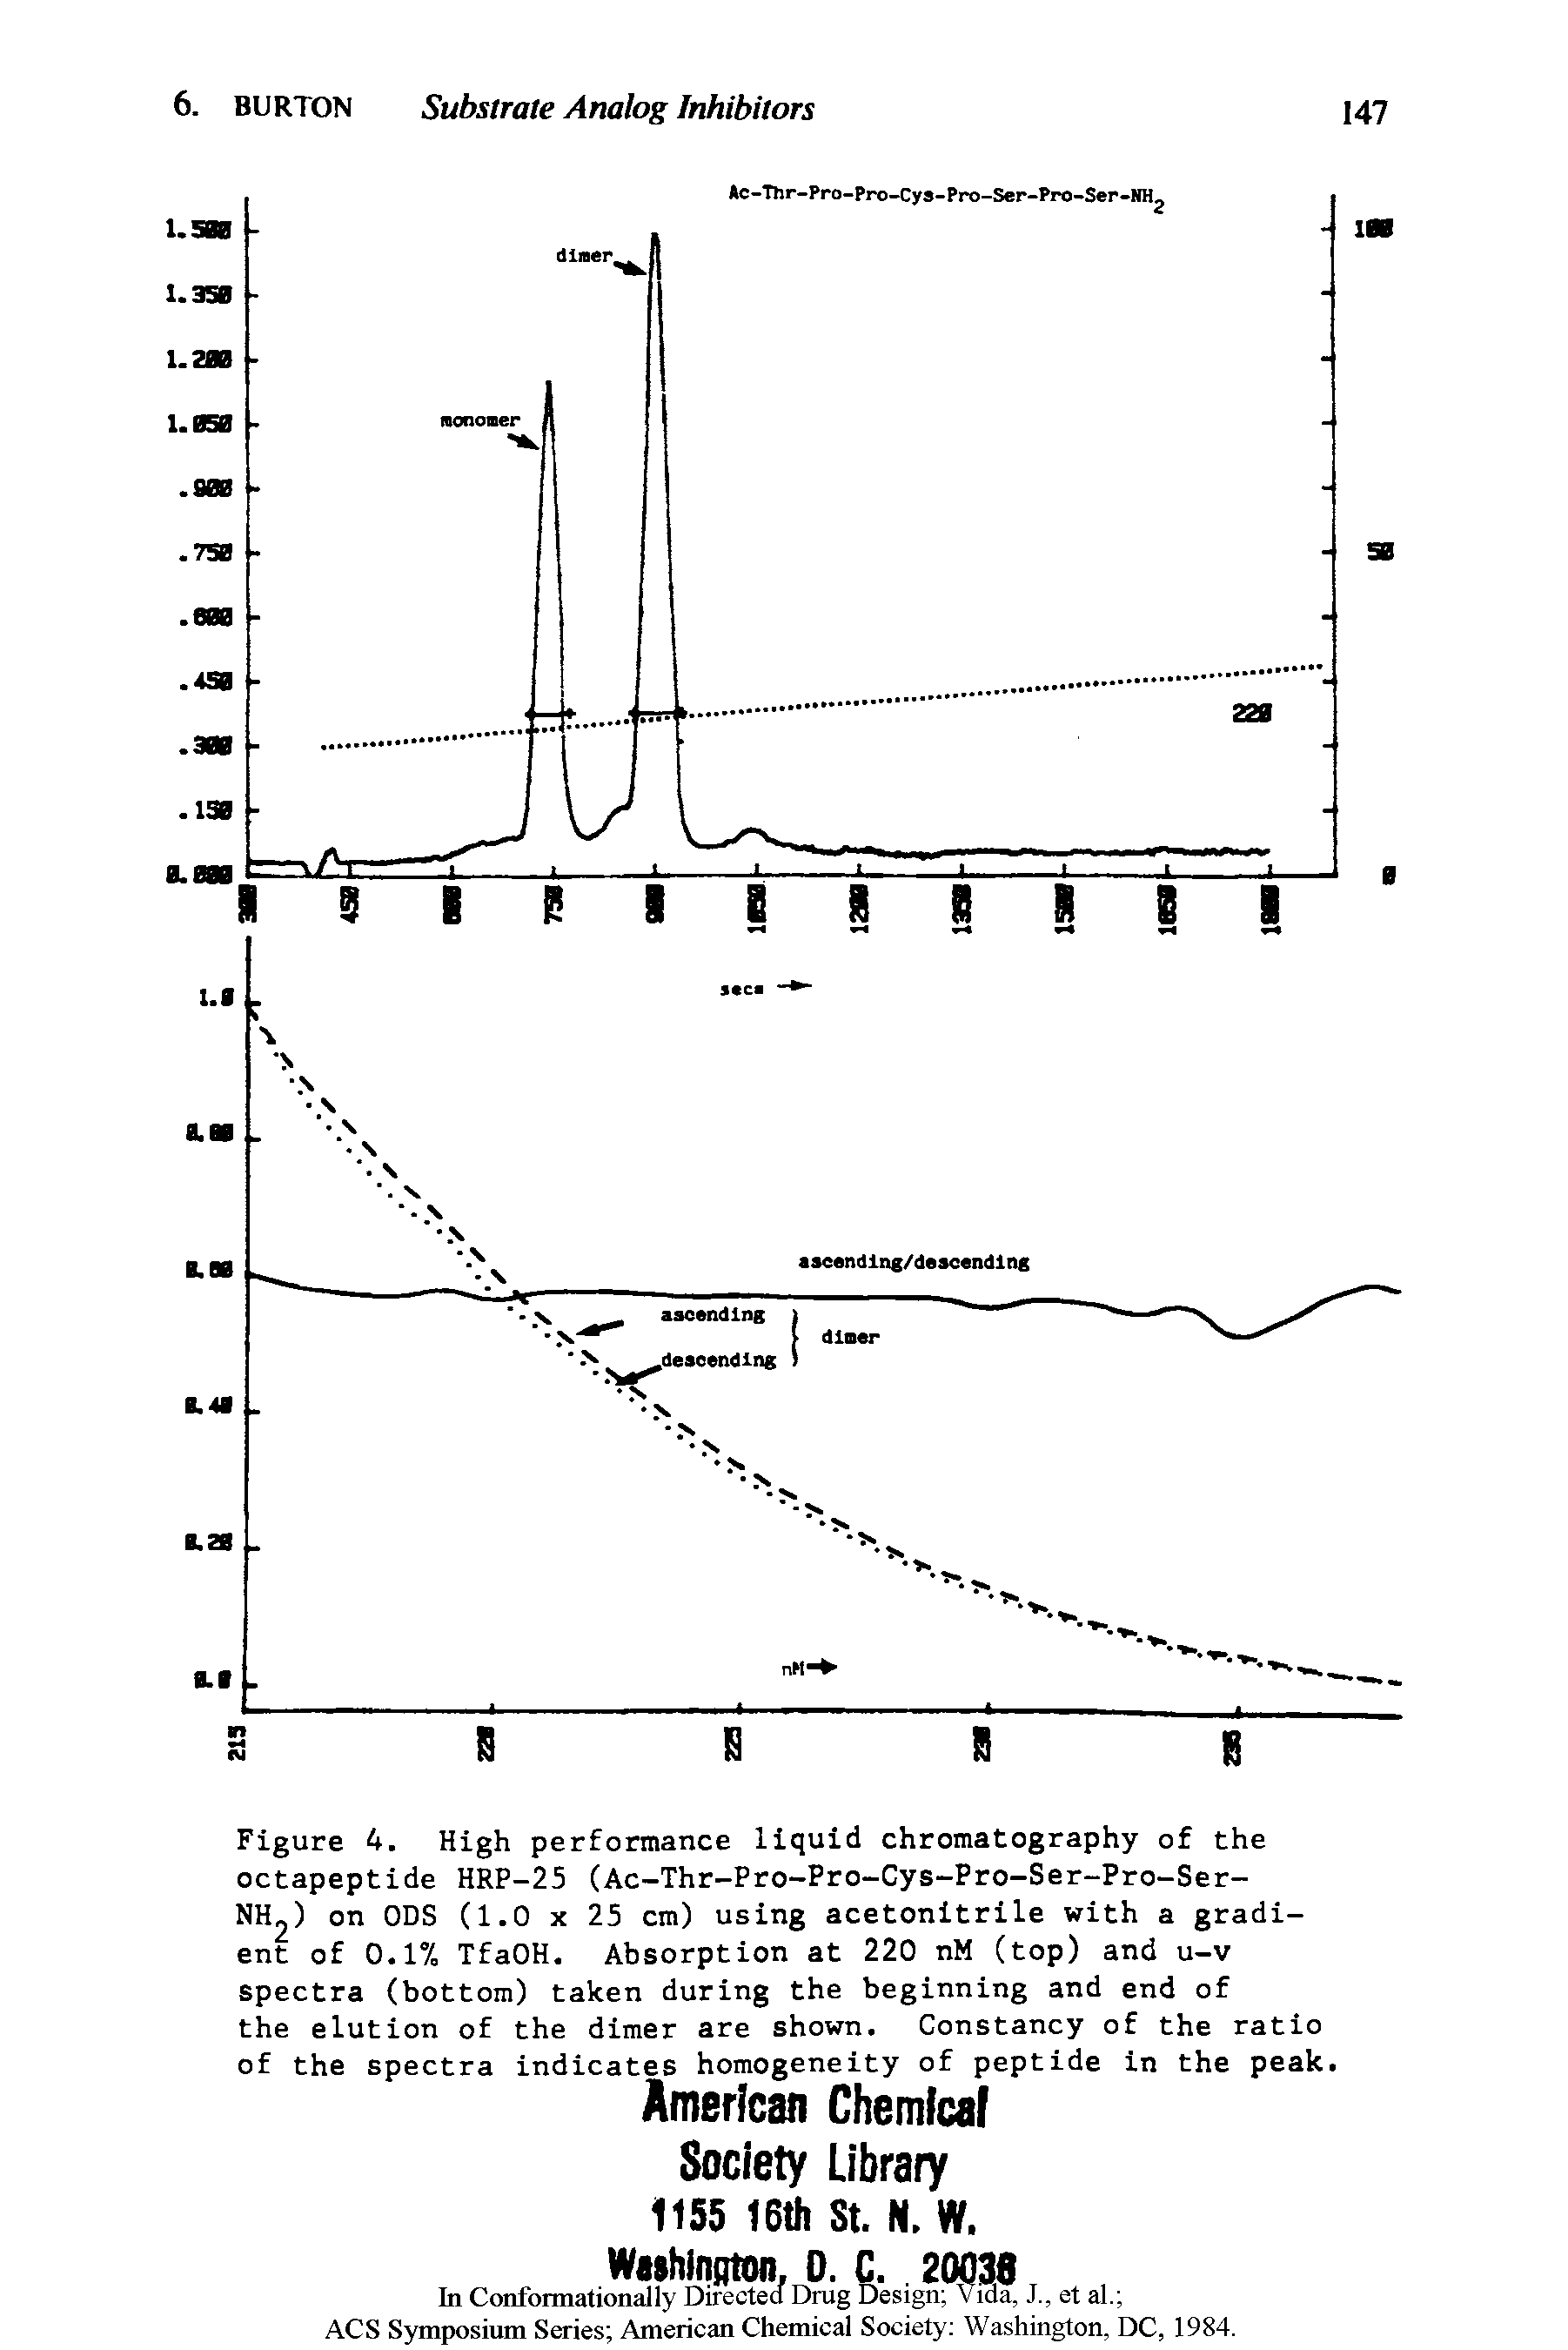 Figure 4. High performance liquid chromatography of the octapeptide HRP-25 (Ac-Thr-Pro-Pro-Cys-Pro-Ser-Pro-Ser-NH2) on ODS (1.0 X 25 cm) using acetonitrile with a gradient of 0.1% TfaOH. Absorption at 220 nM (top) and u-v spectra (bottom) taken during the beginning and end of the elution of the dimer are shown. Constancy of the ratio of the spectra indicates homogeneity of peptide in the peak.